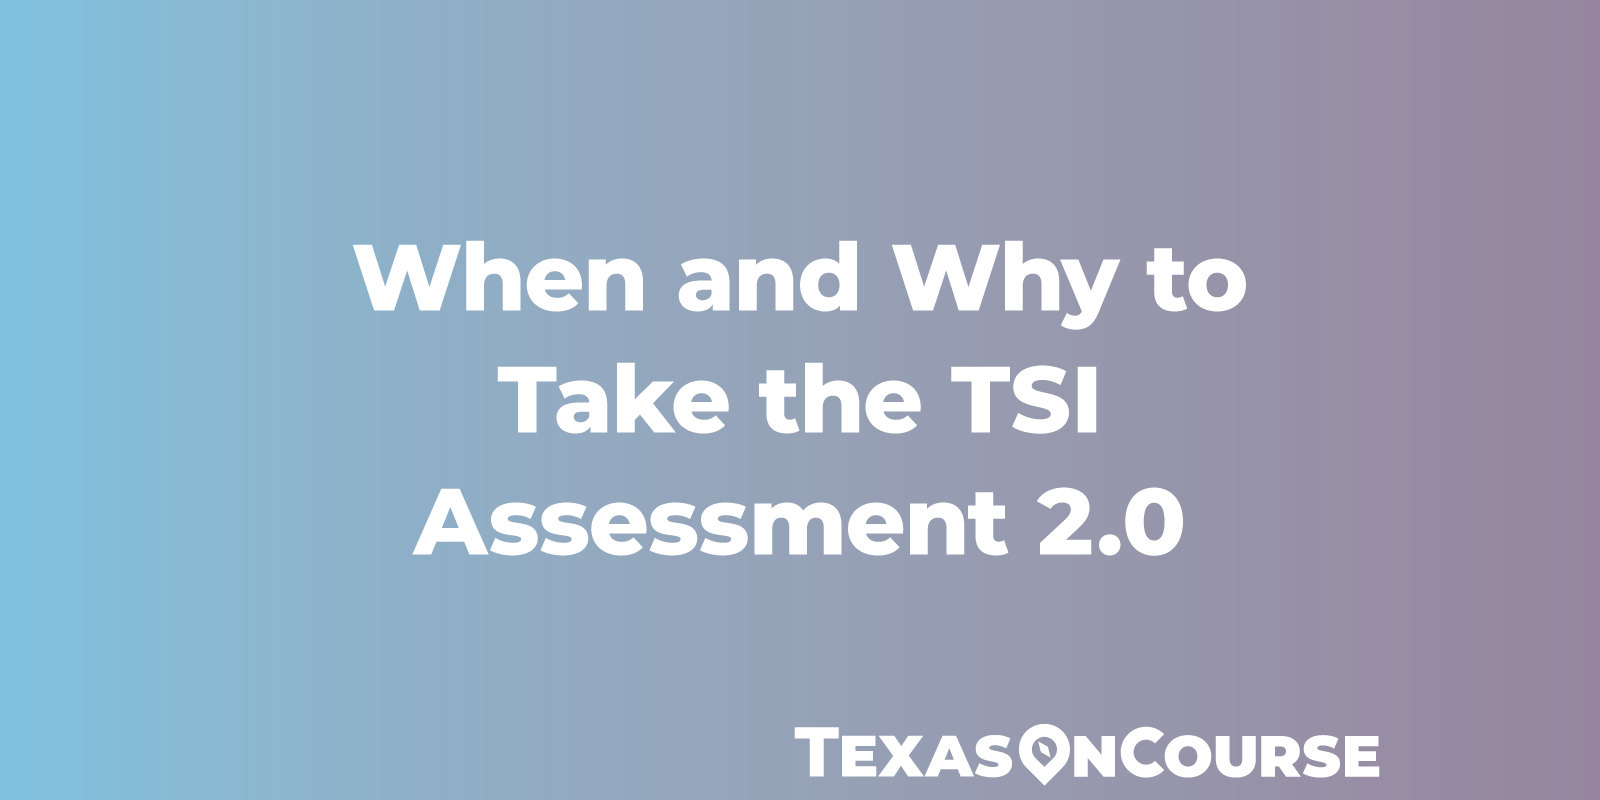 When and Why to Take the TSI Assessment 2.0